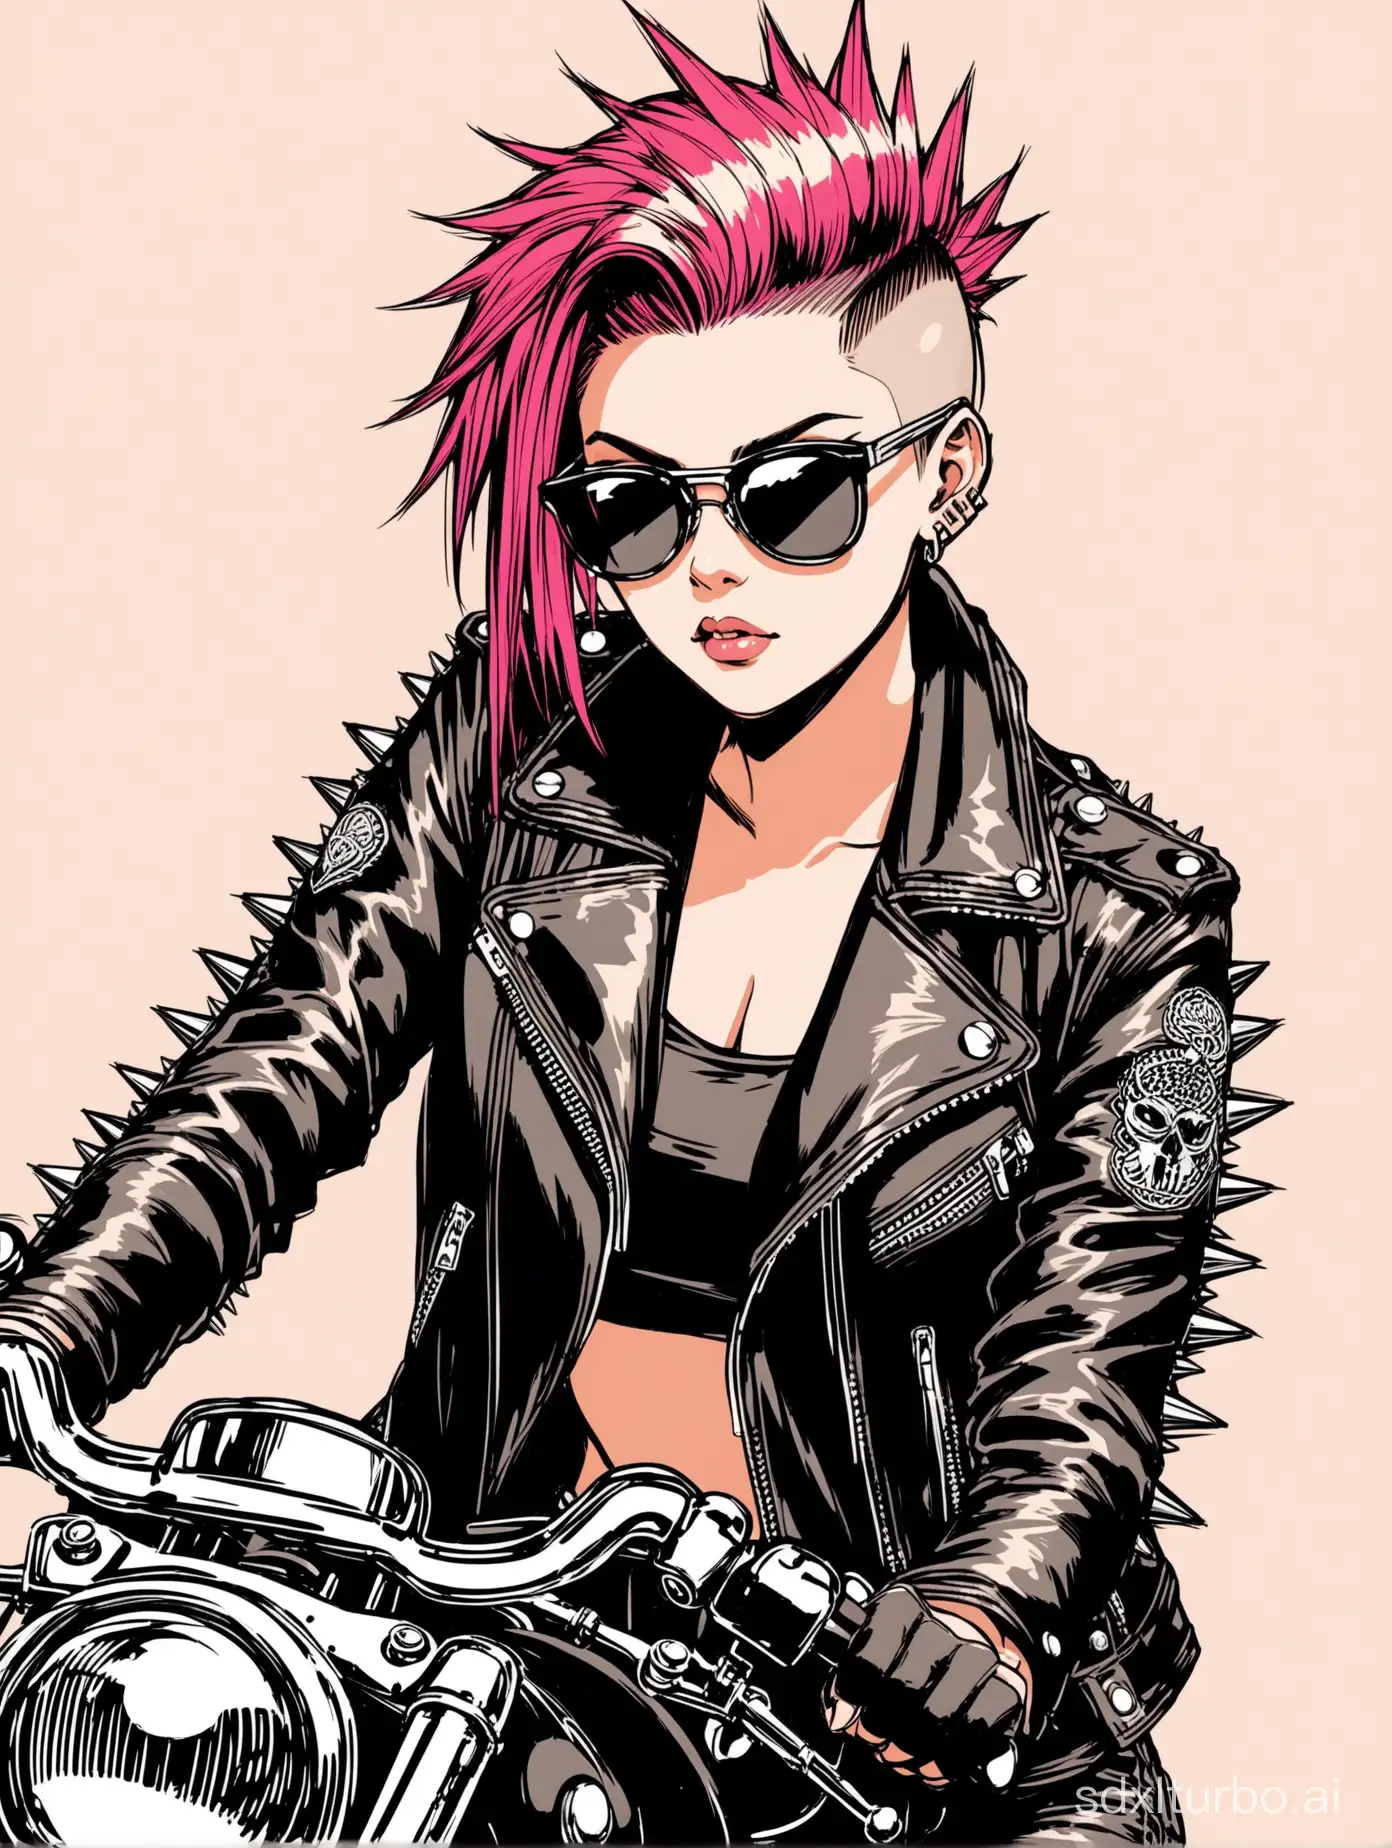 art, drawing, beauty drawing on paper with felt-tip pens, girl, shaved temple hair, undercut hair, mohawk, wearing a leather jacket, with spikes, sitting on a motorcycle, coolness, Pathos posing, stange eyes, sunglasses are slightly lowered, beautiful, aesthetetic